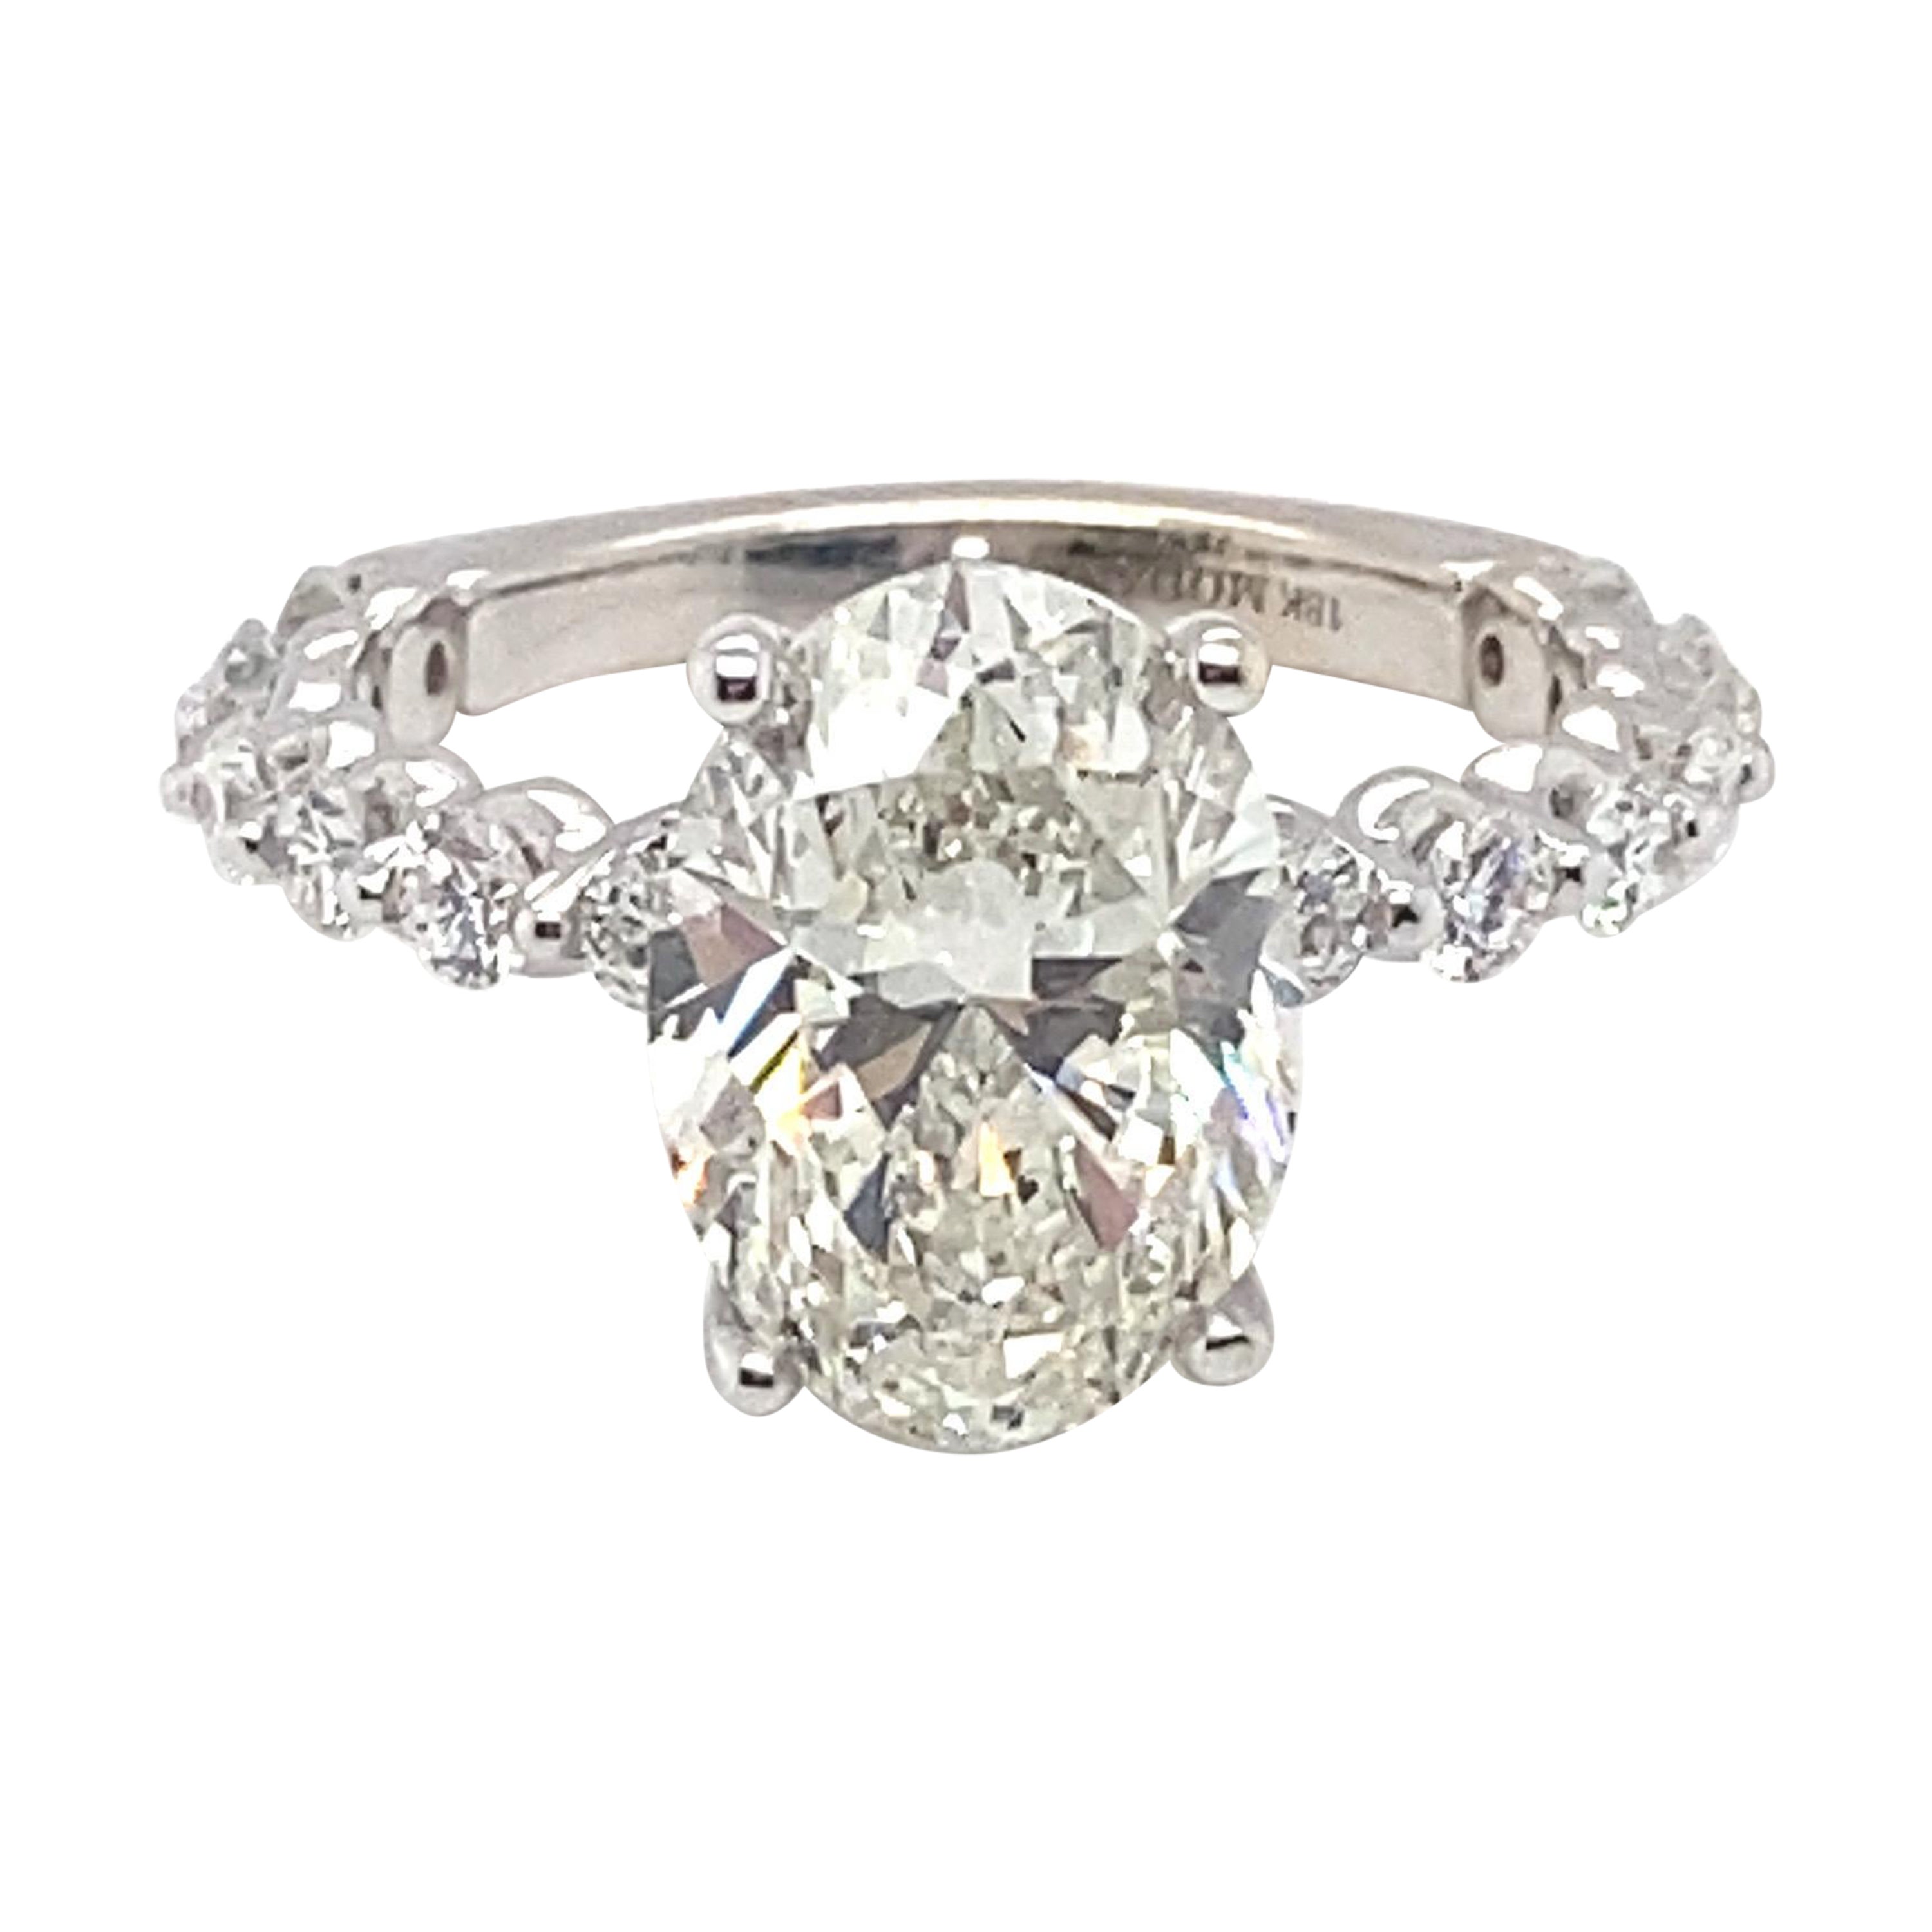 GIA Certified 4.03 Carat Oval Diamond White Gold Engagement Ring